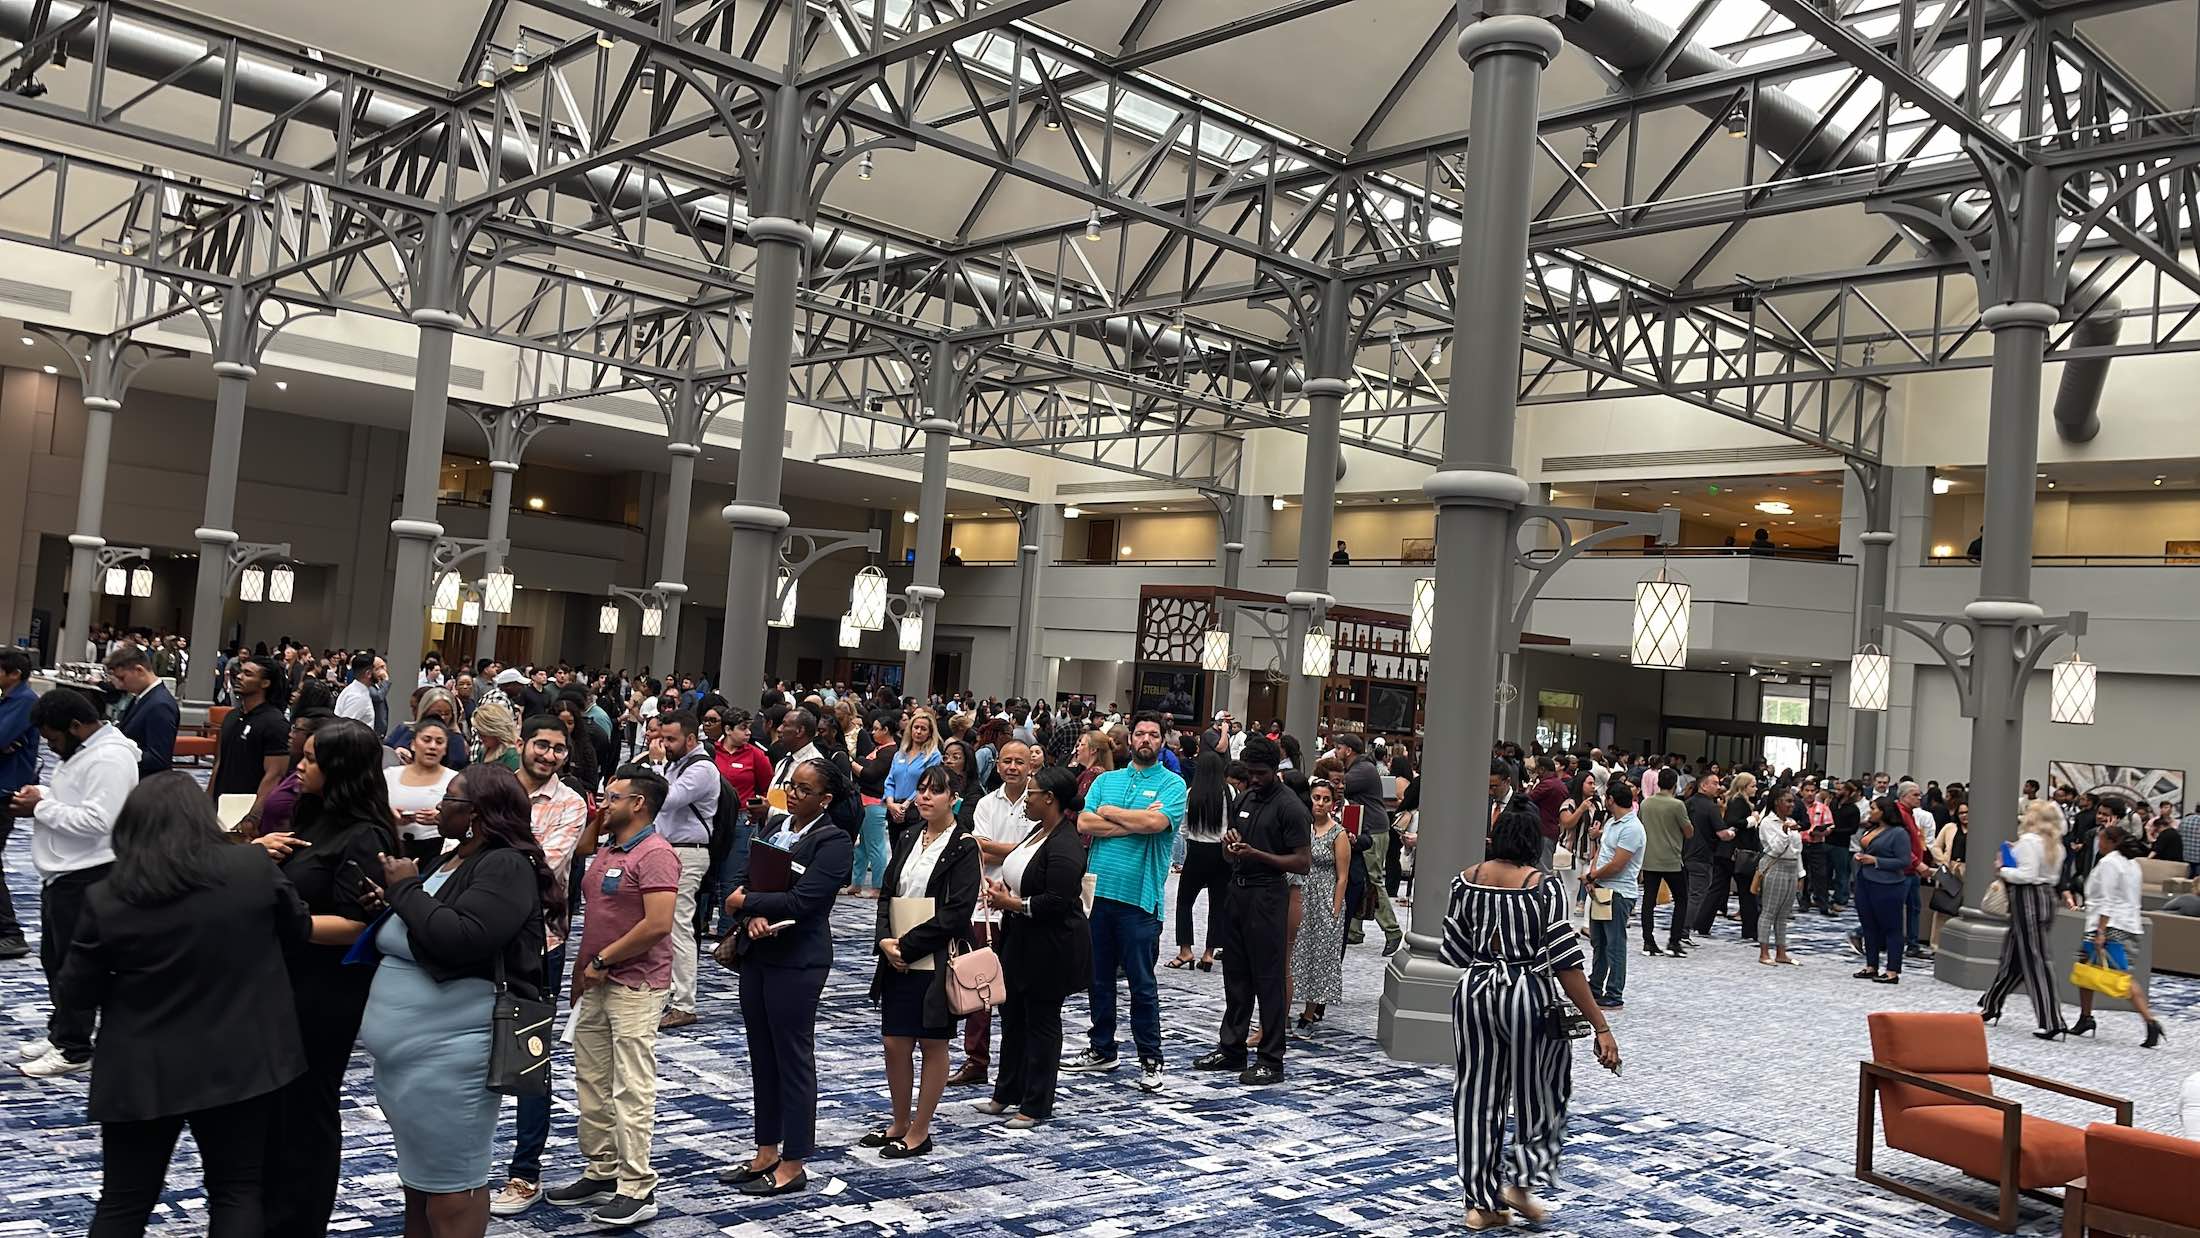 Thousands Line Up For Jobs At United Airlines Live and Let's Fly